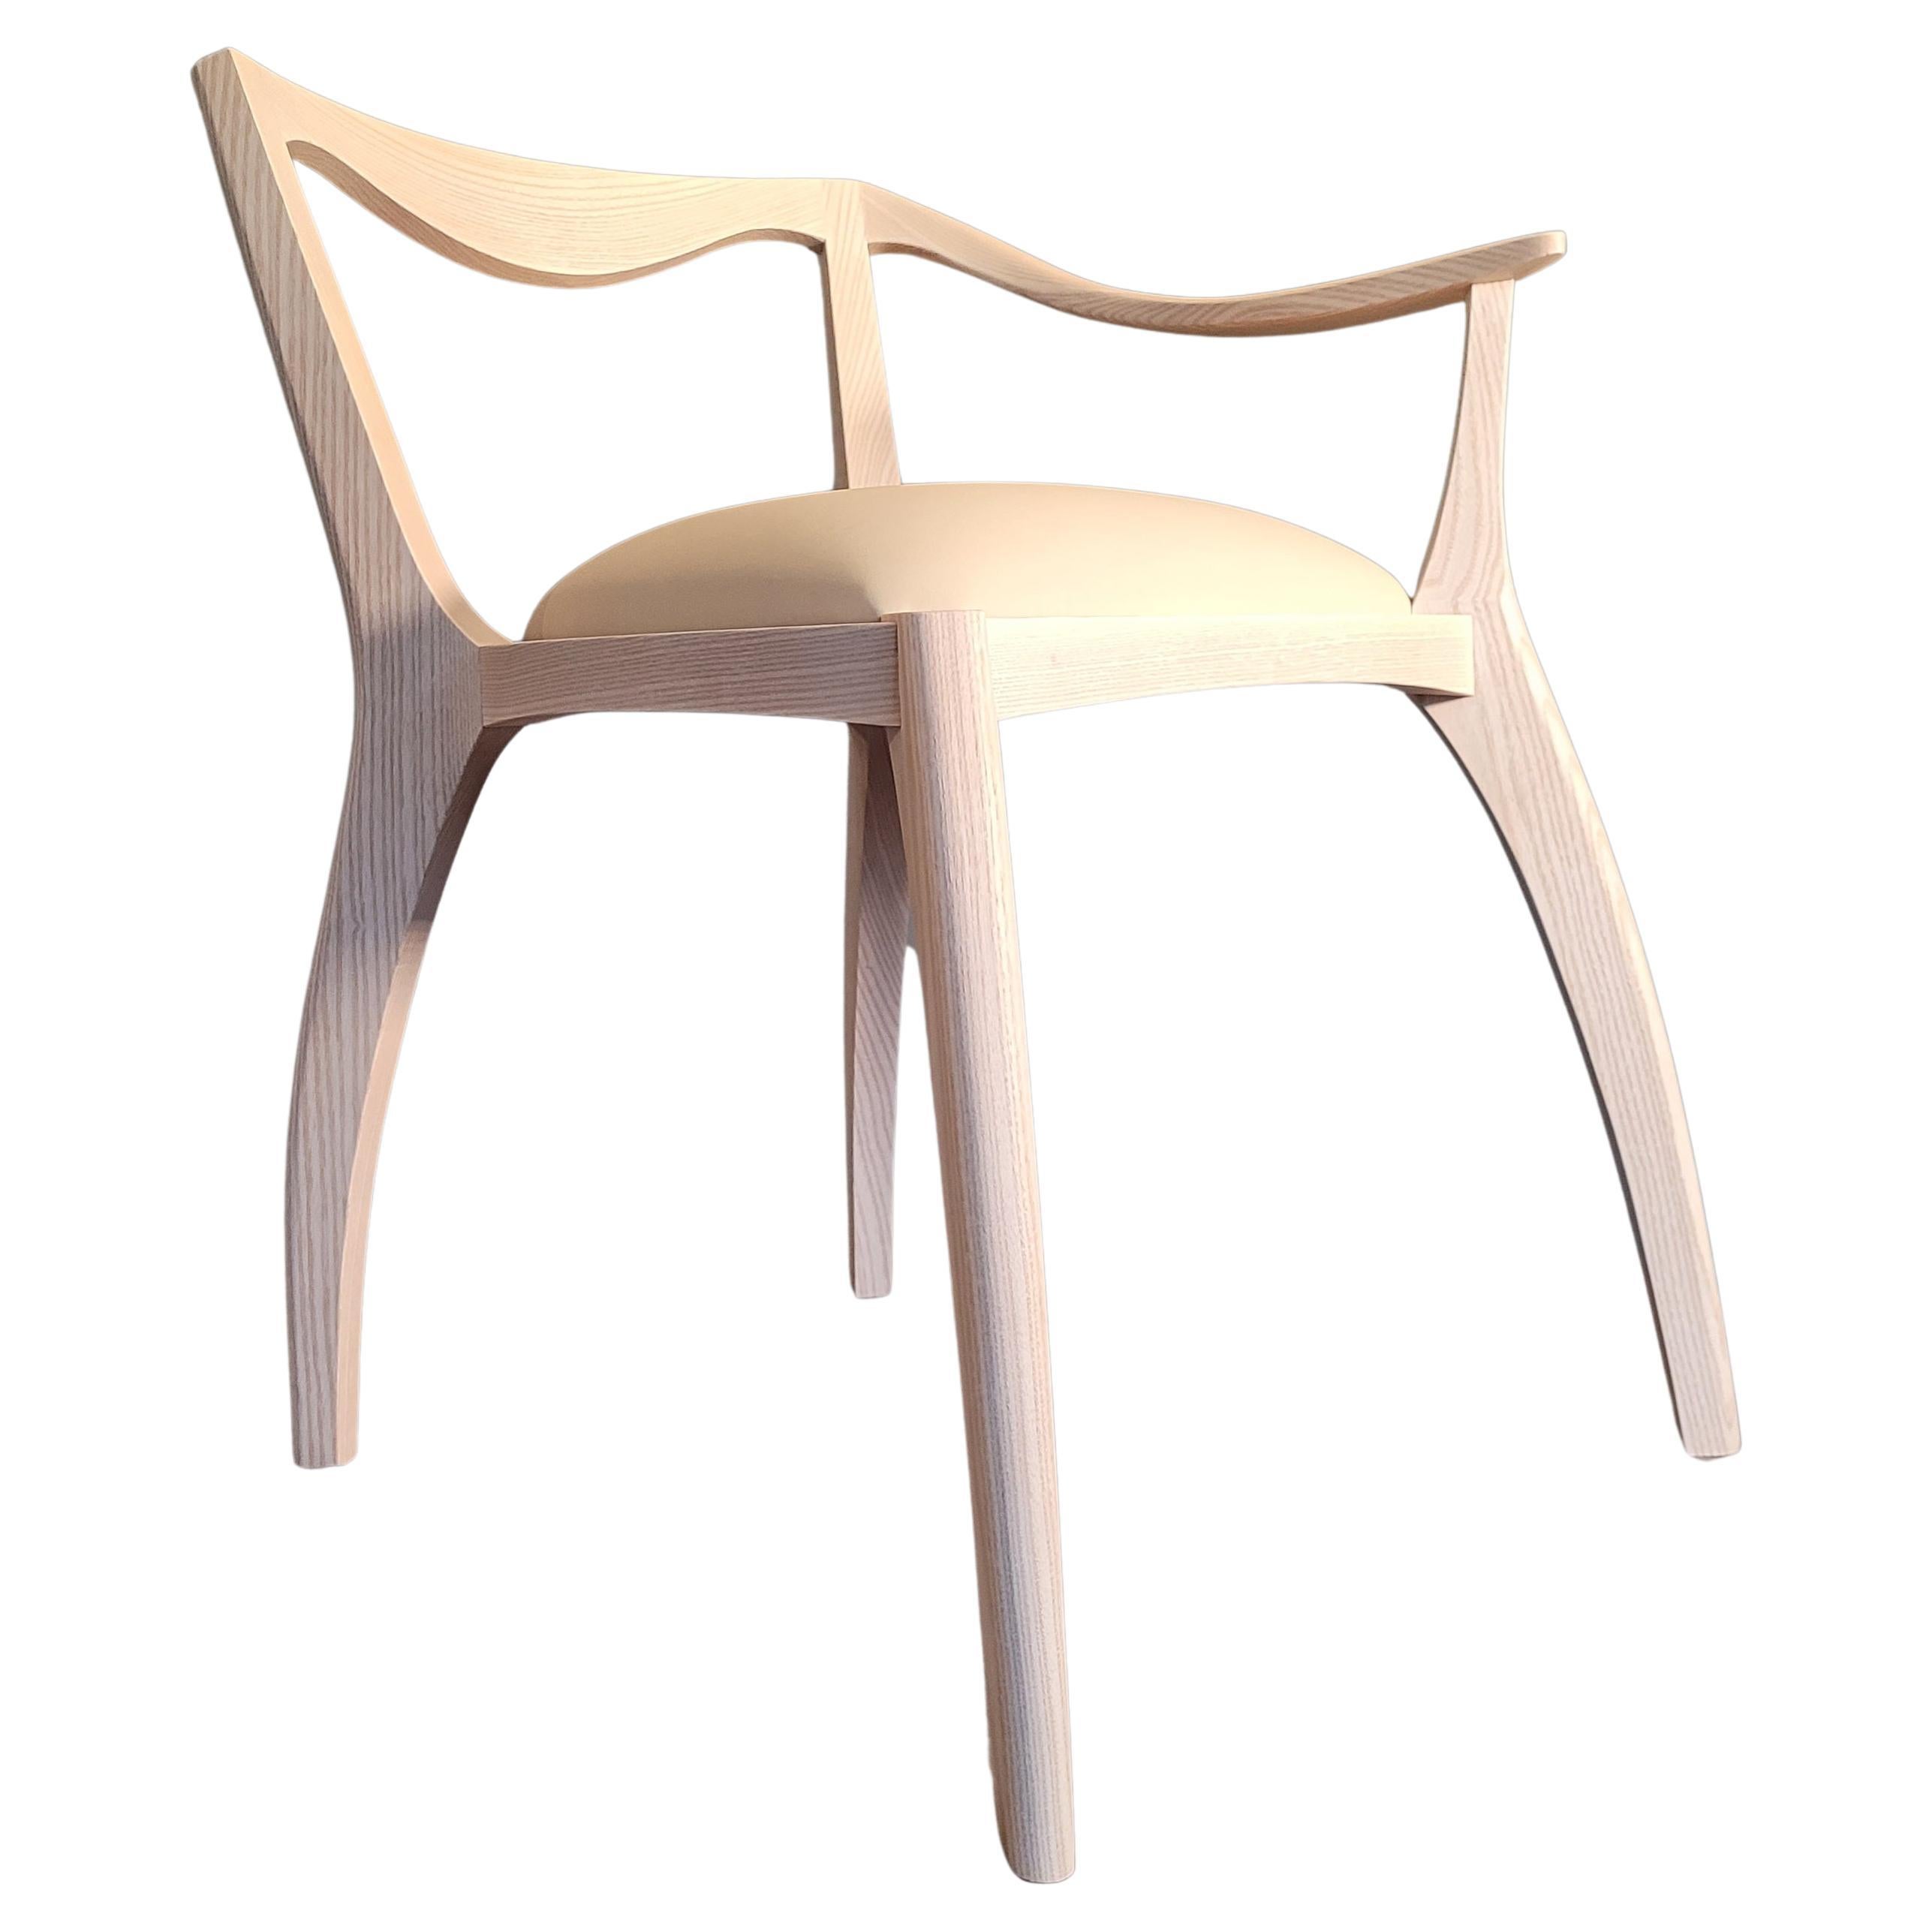 Mond 12 Reading Chair - Modern Design hand-crafted in Germany For Sale